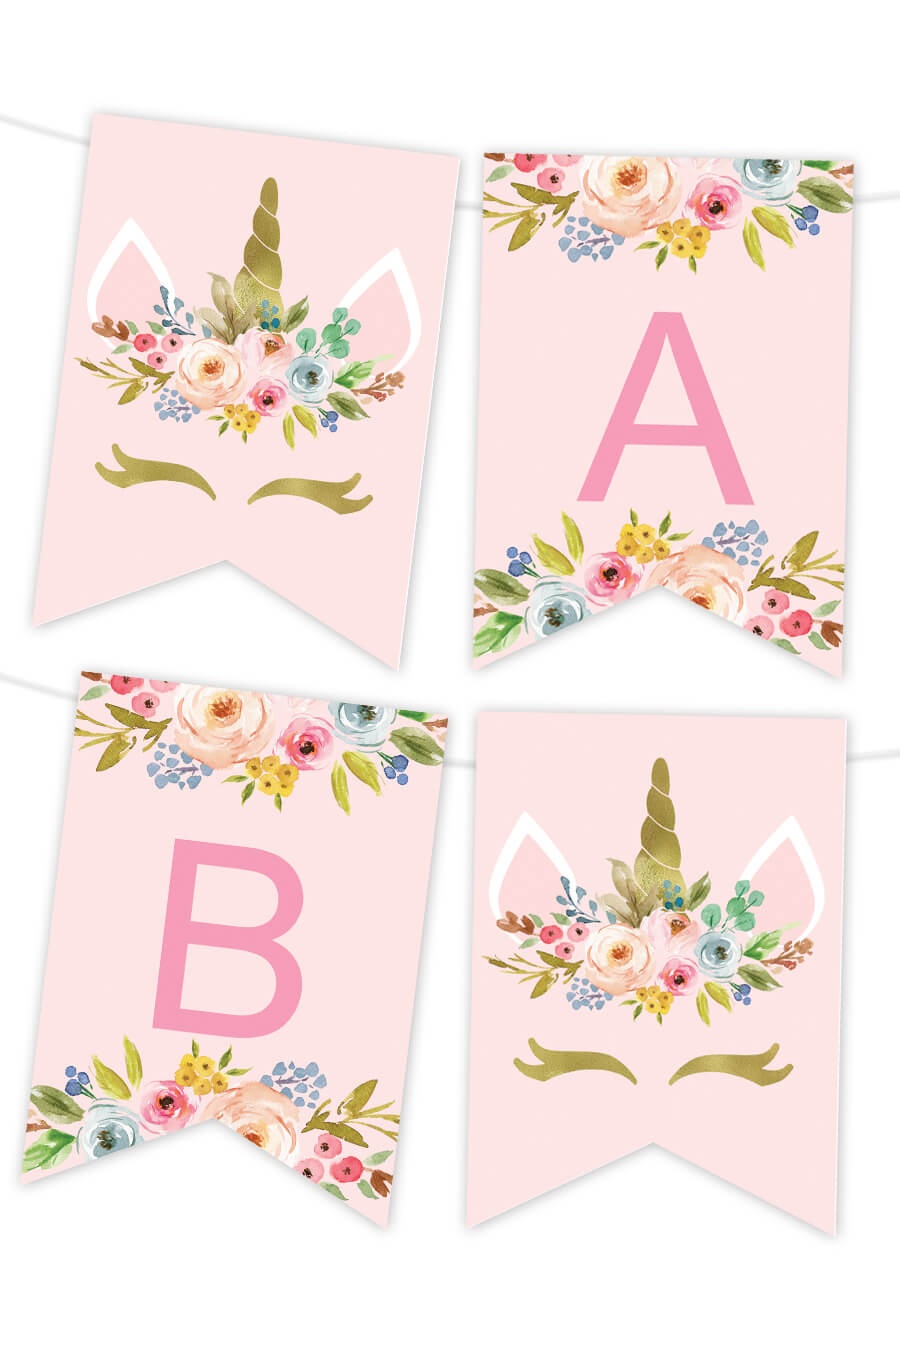 Printable Banners - Make Your Own Banners With Our Printable Templates - Free Printable Pink Banner